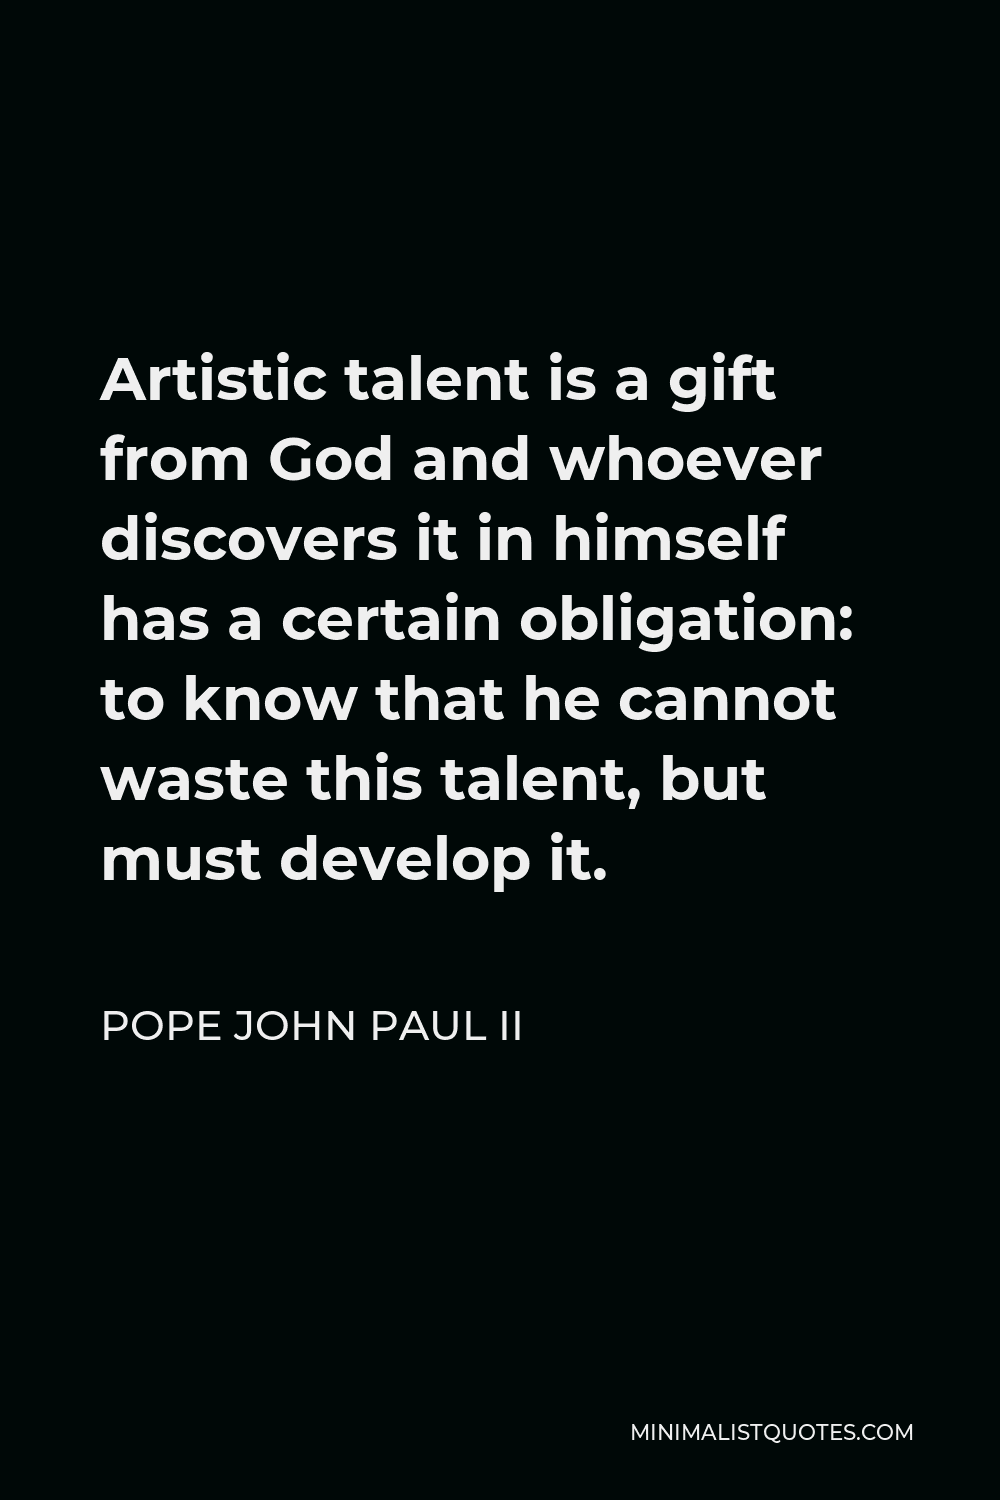 Pope John Paul II Quote - Artistic talent is a gift from God and whoever discovers it in himself has a certain obligation: to know that he cannot waste this talent, but must develop it.